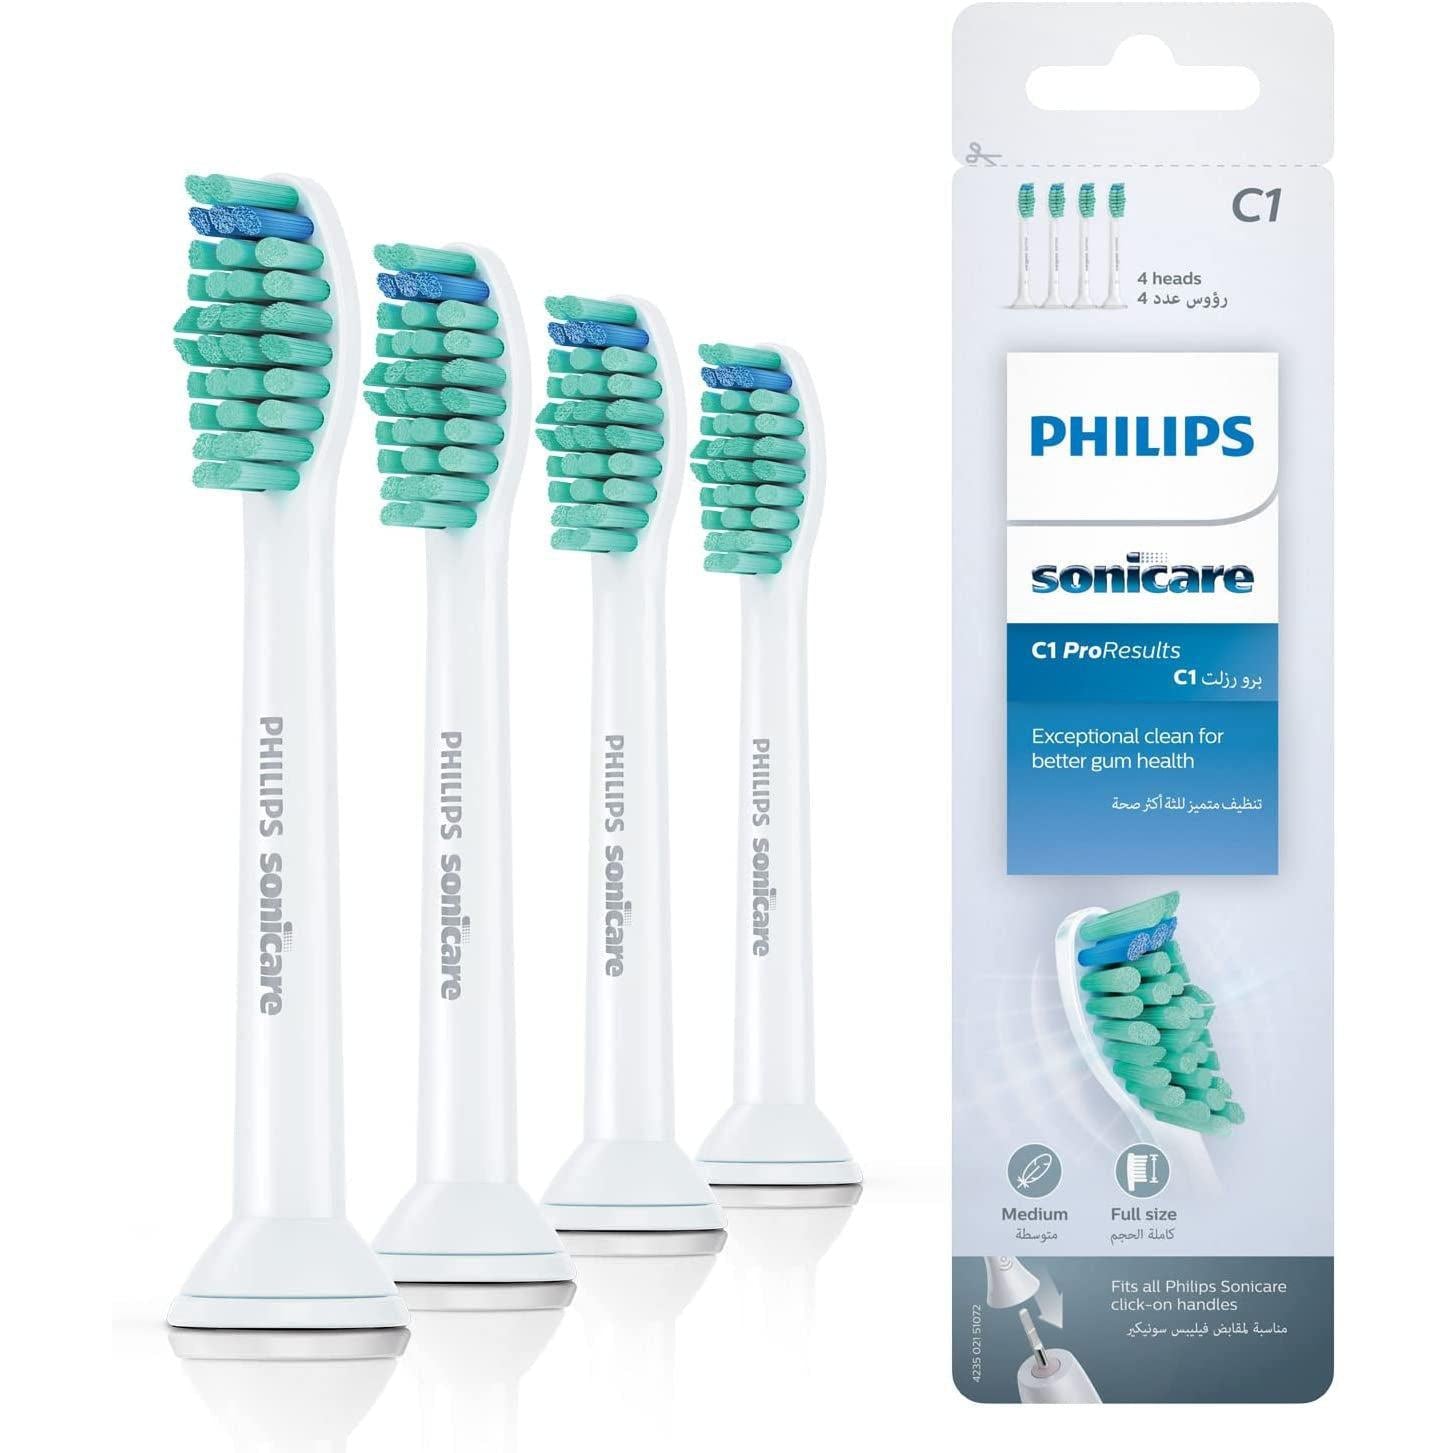 Philips Sonicare ProResults Standard Sonic Toothbrush Heads HX6014/07 White, 4 Pack - Healthxpress.ie